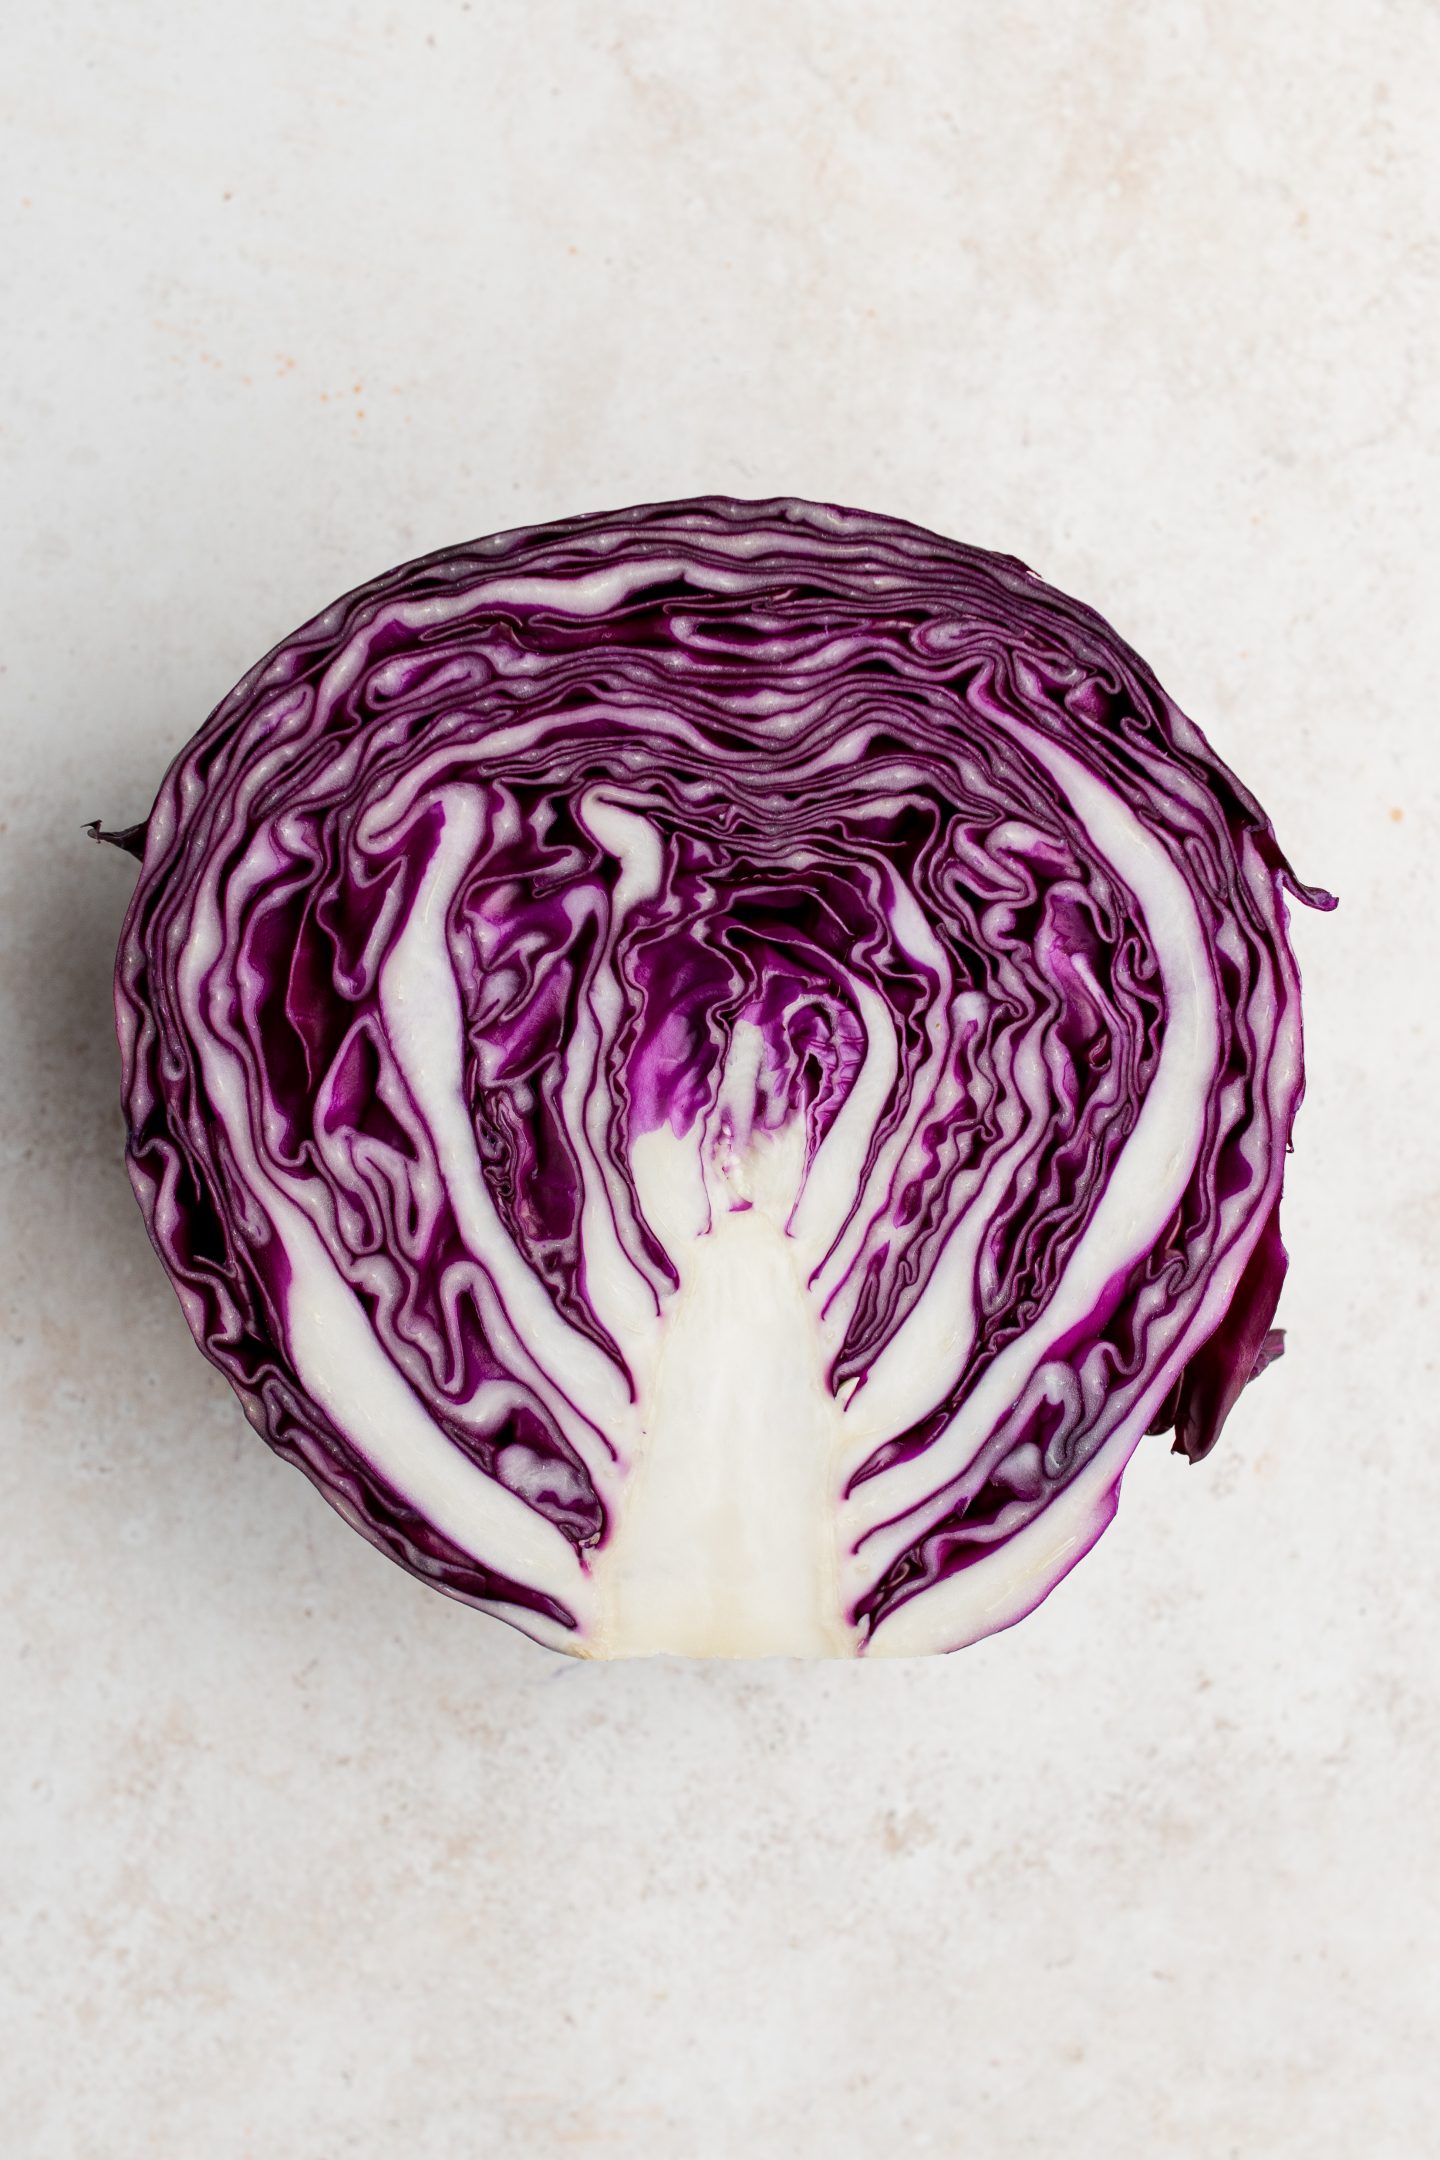 cut red cabbage